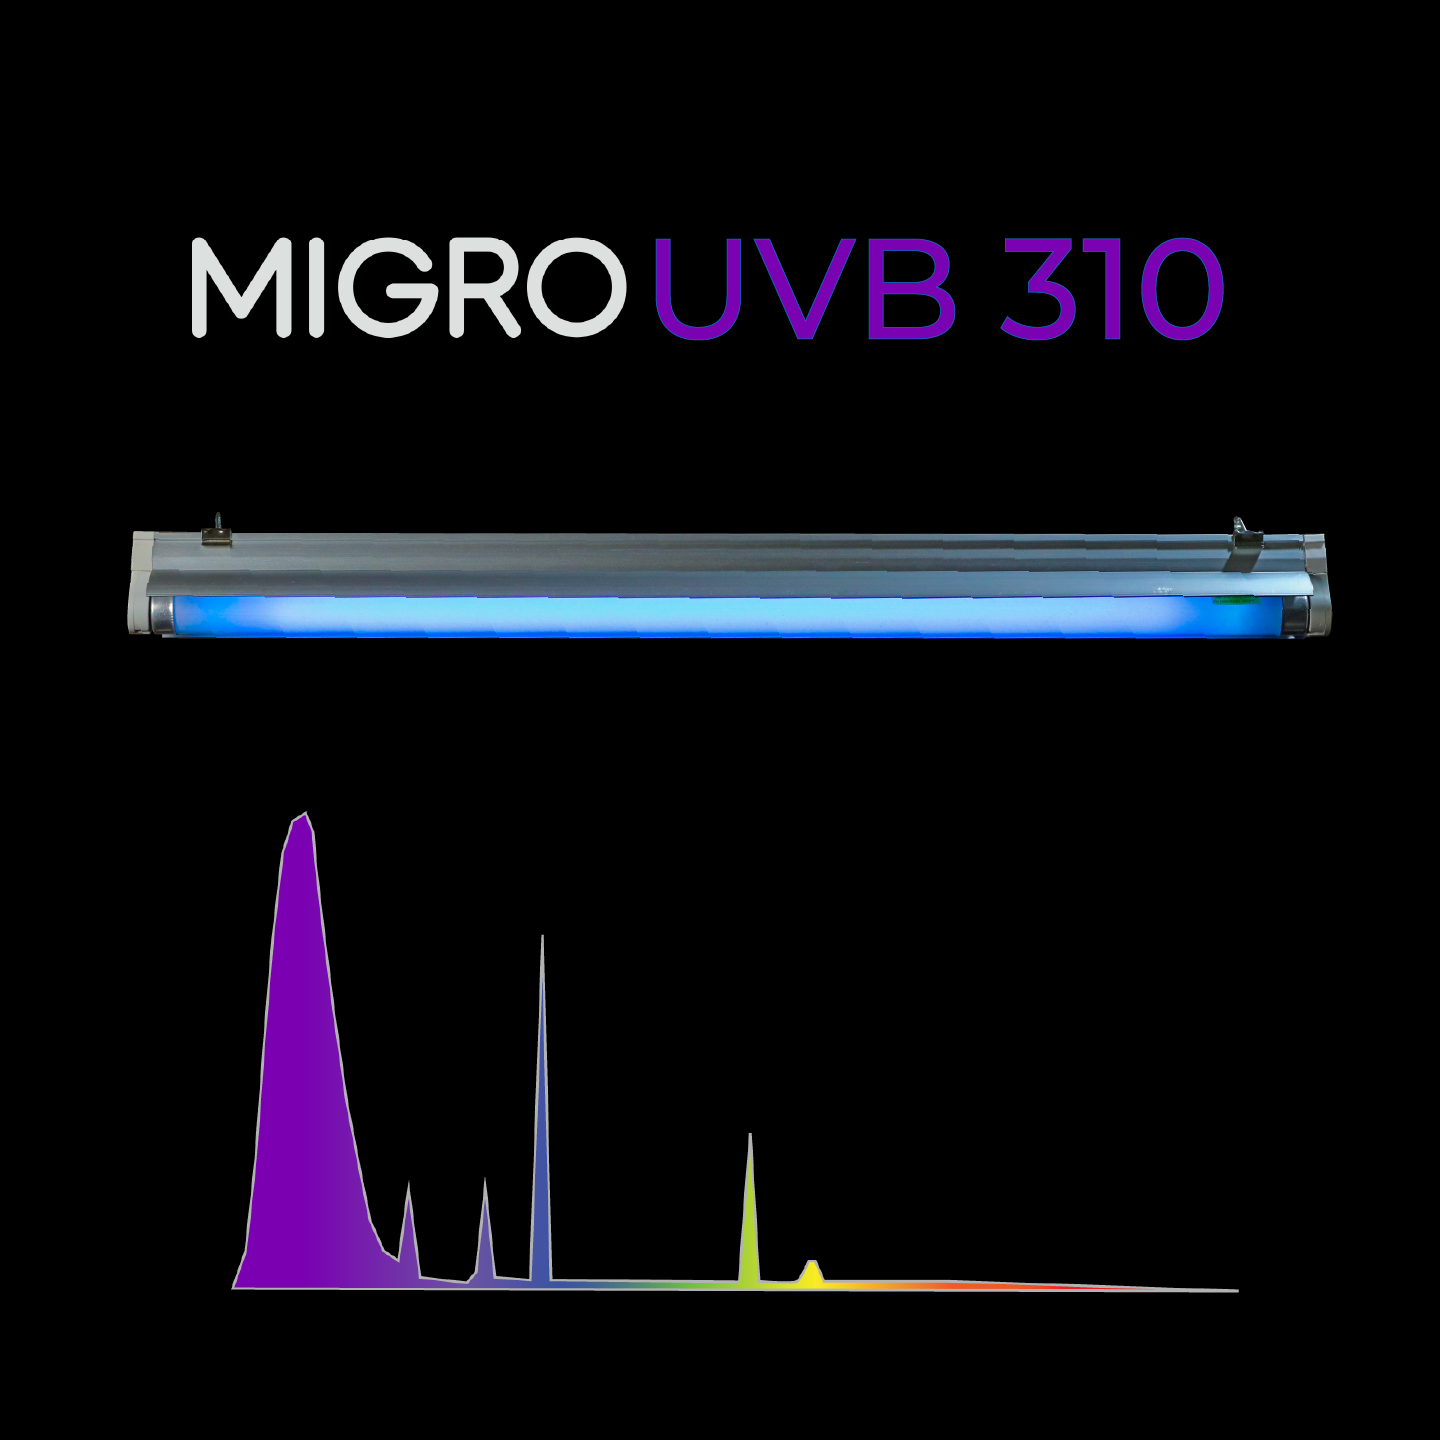 MIGRO UVB 310 lamp and fluorescent tube